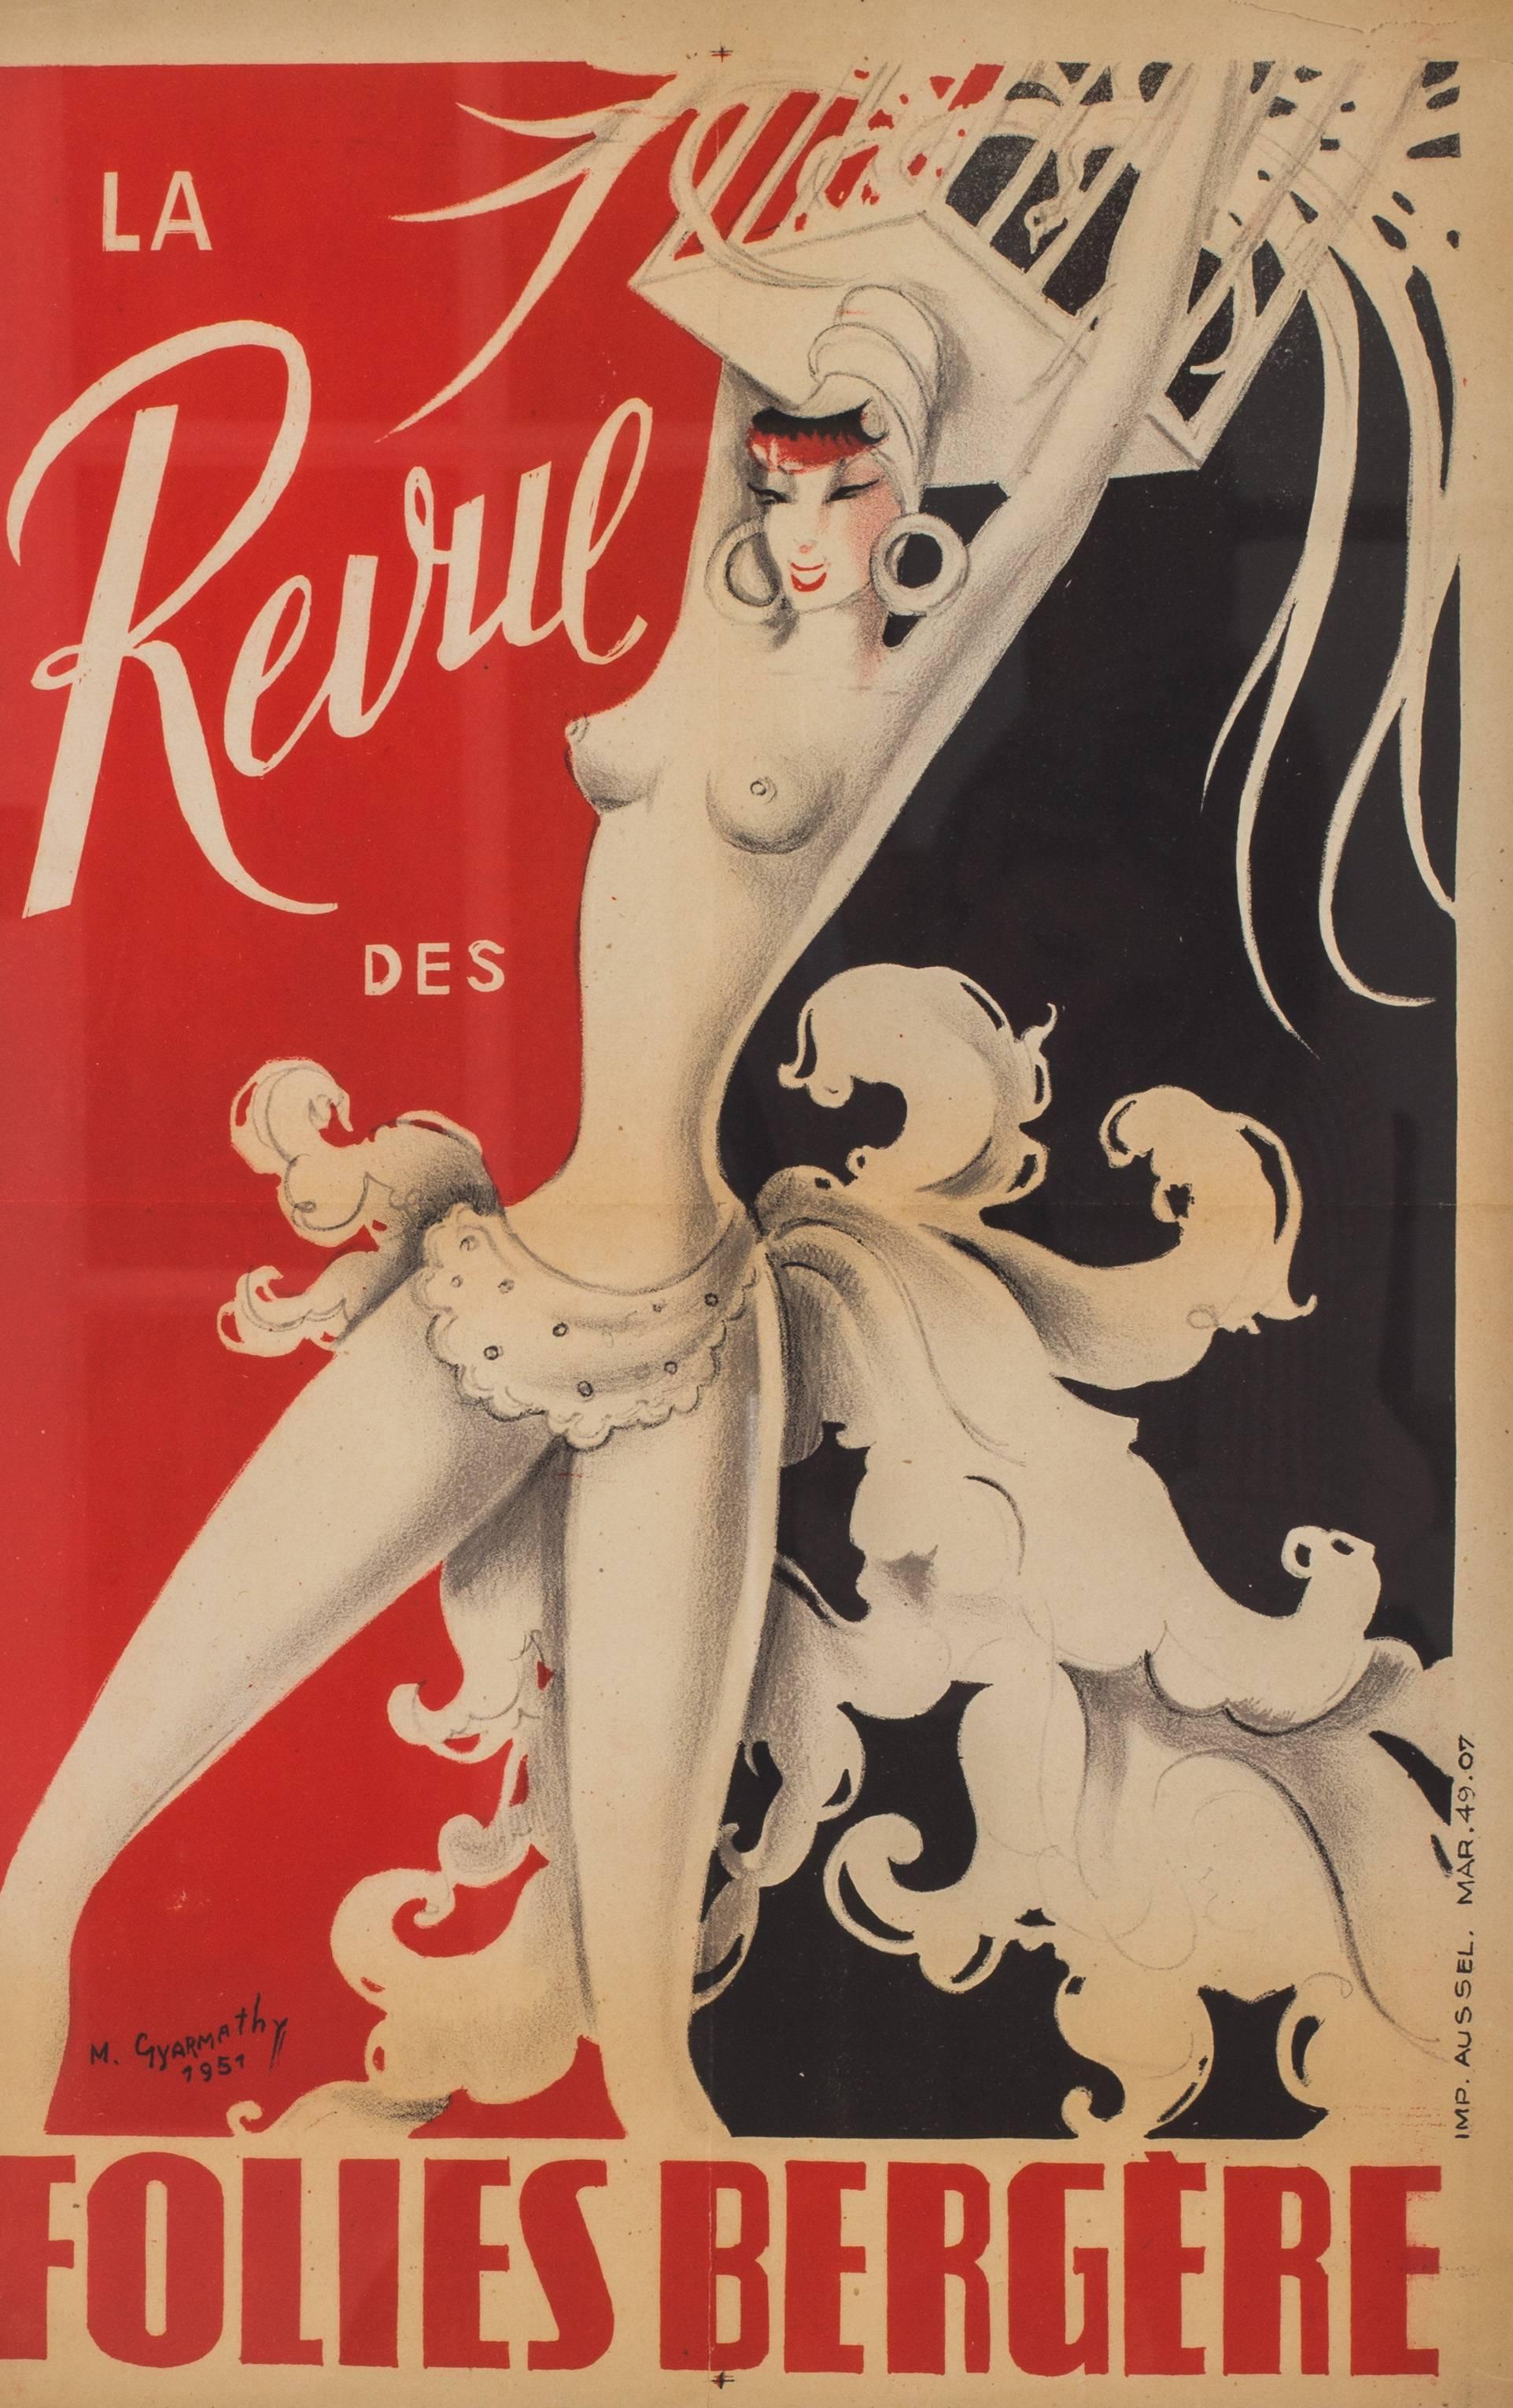  ‘La Revue des Folies-Bergere showing Miss Bluebell’ signed by M. Gyarmathy (Miss Bluebell), 1951

An advertising poster for the famous saucy Paris review. starring Miss Bluebell.  Mary Gyarmathy was the founder and driving force behind the Bluebell